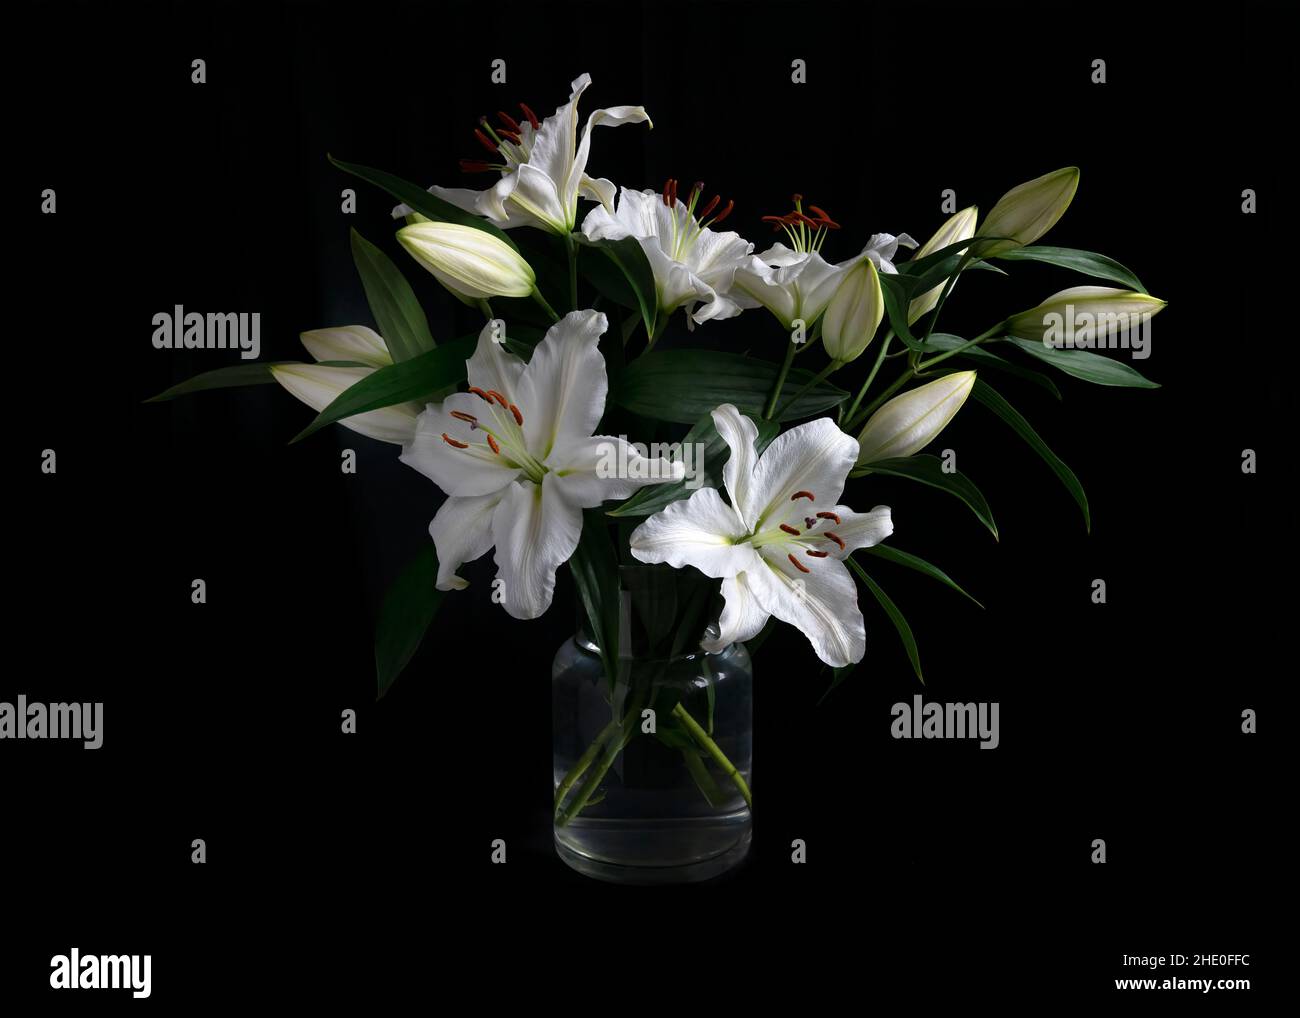 Bouquet of beautiful elegant white lilies in a glass vase with a Black blackground Stock Photo